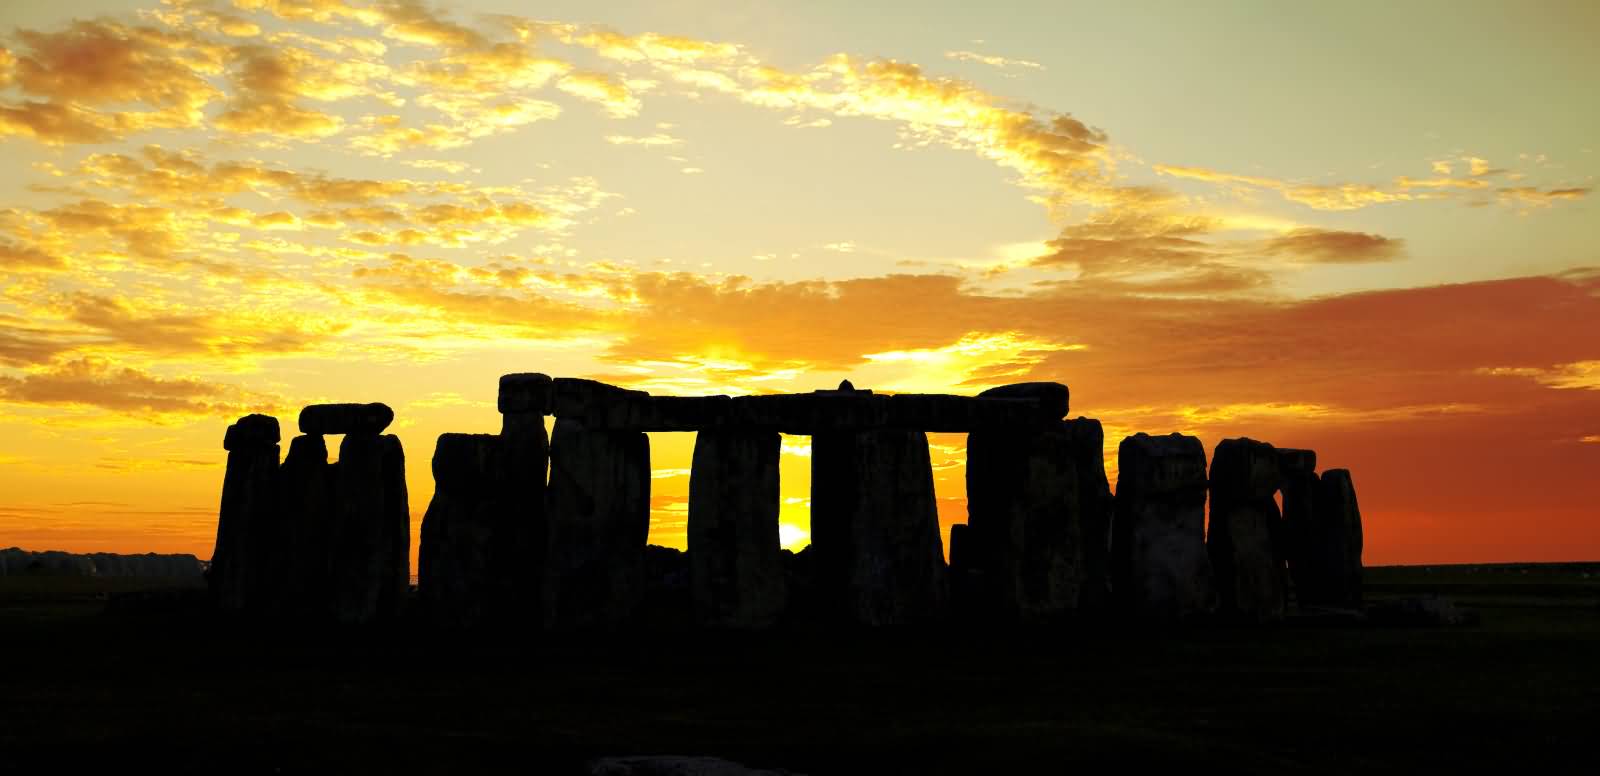 Sunset View Of The Stonehenge Monument